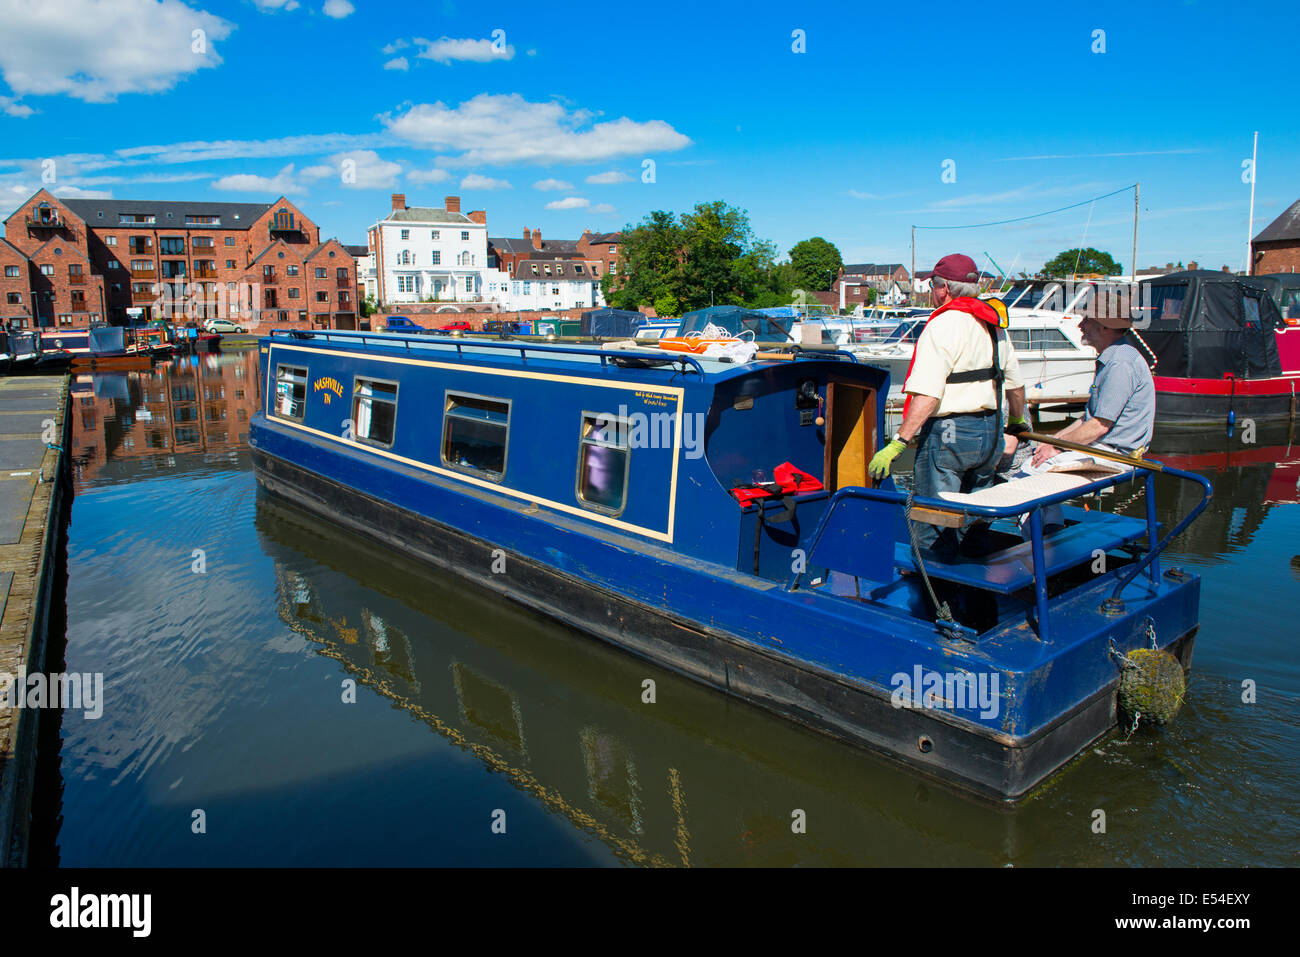 A canal boat on Stourport On Severn canal basin, Worcestershire, England, UK Stock Photo